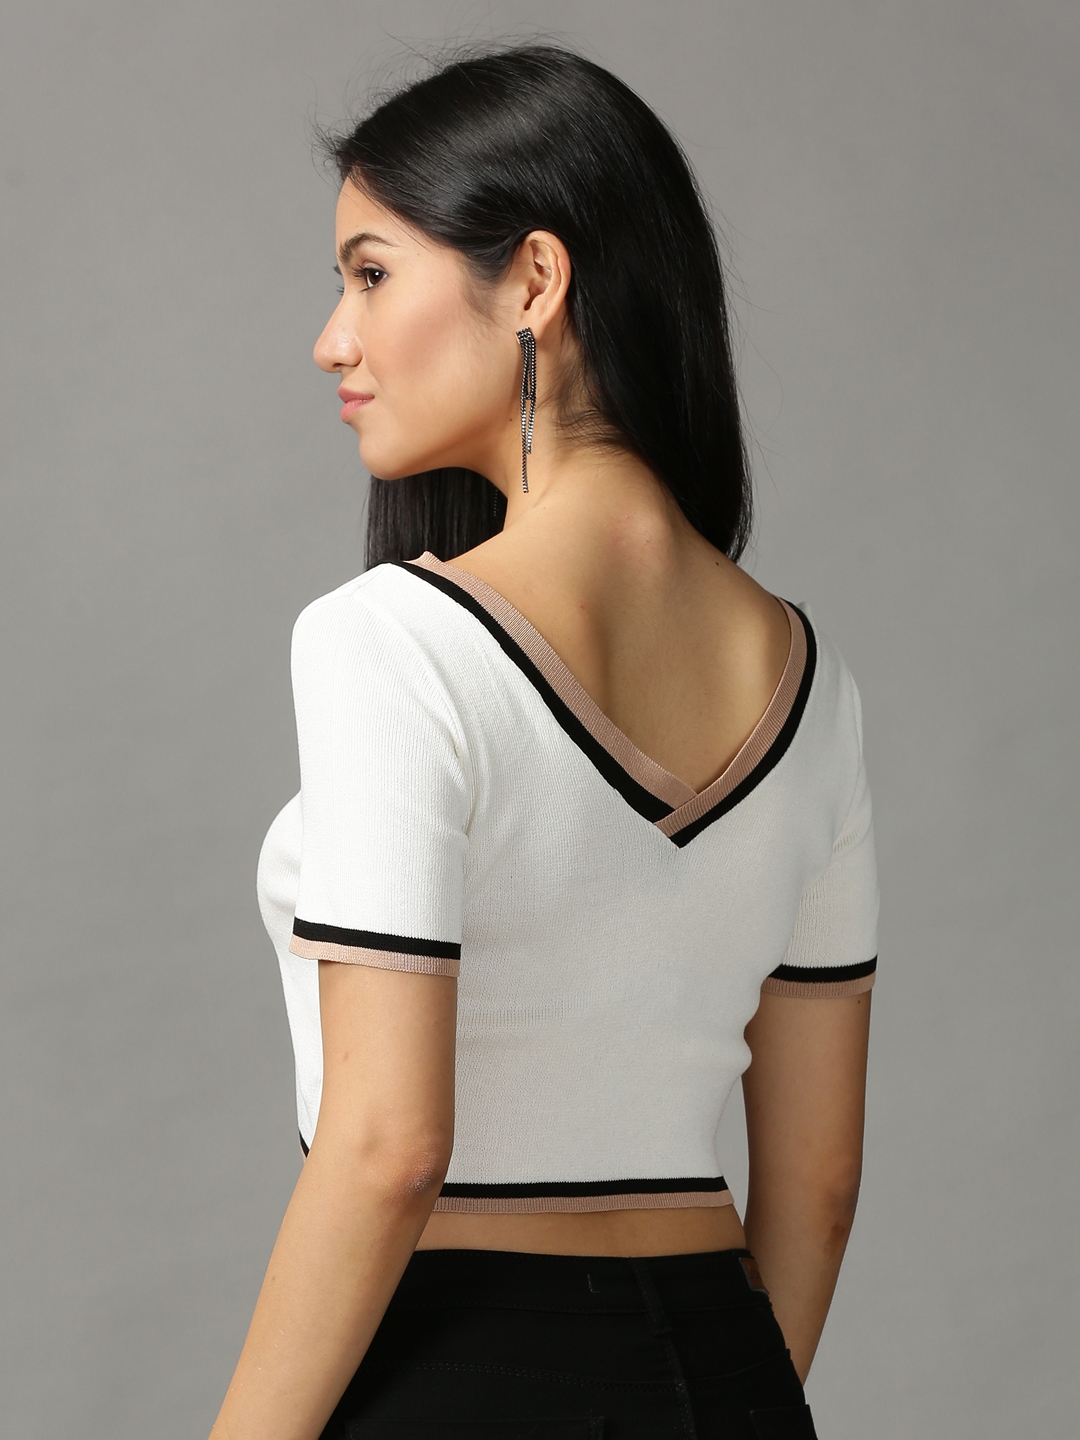 Women's White Polycotton Solid Tops